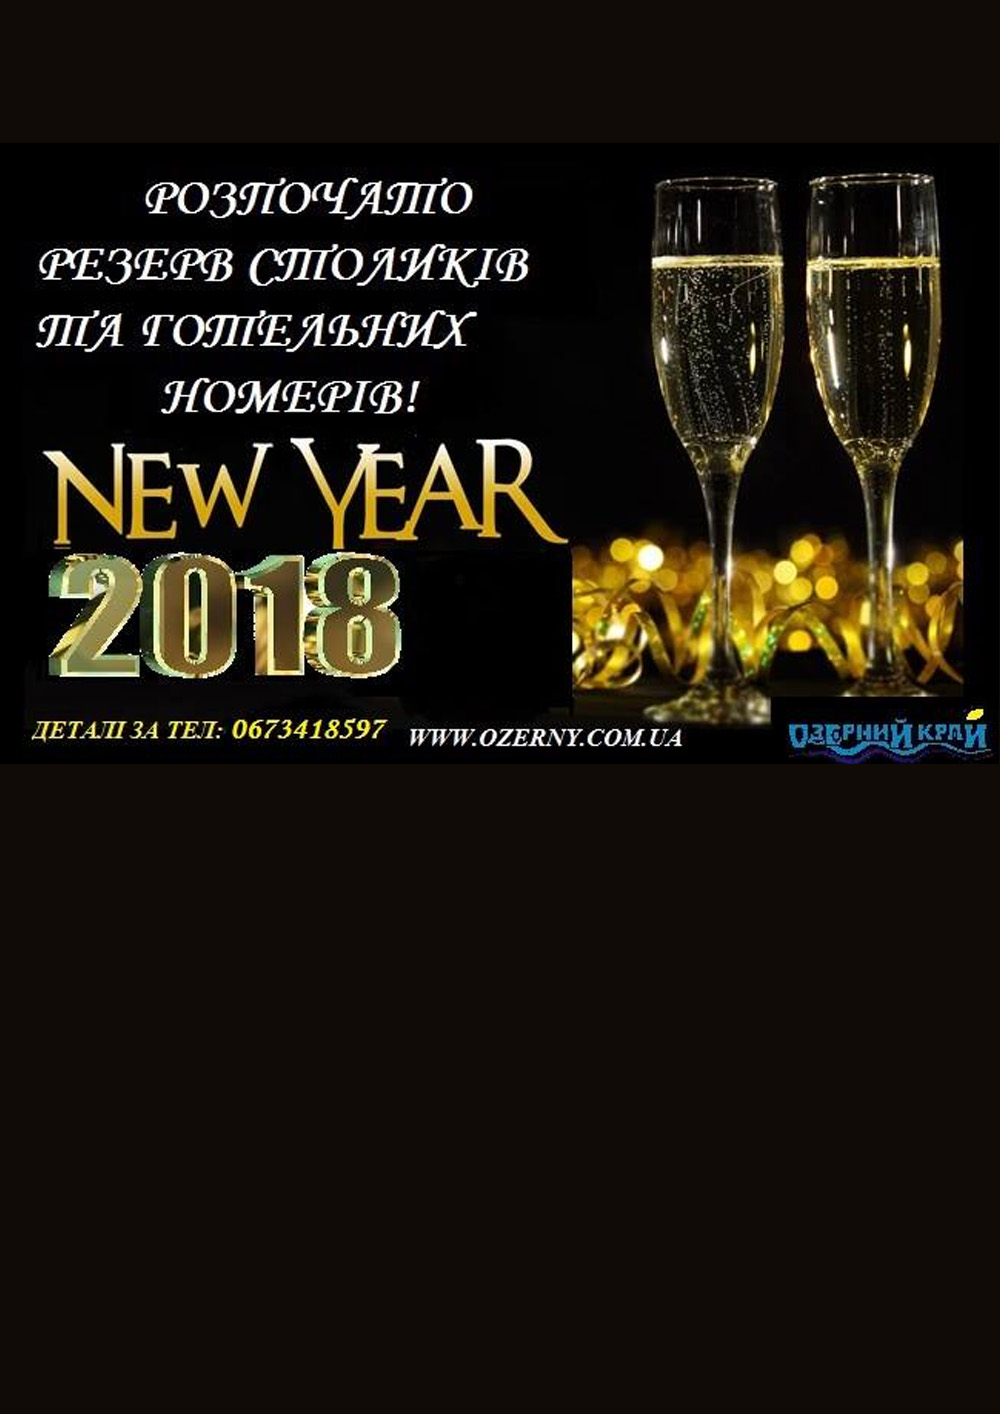 New Year Party 2018 in 